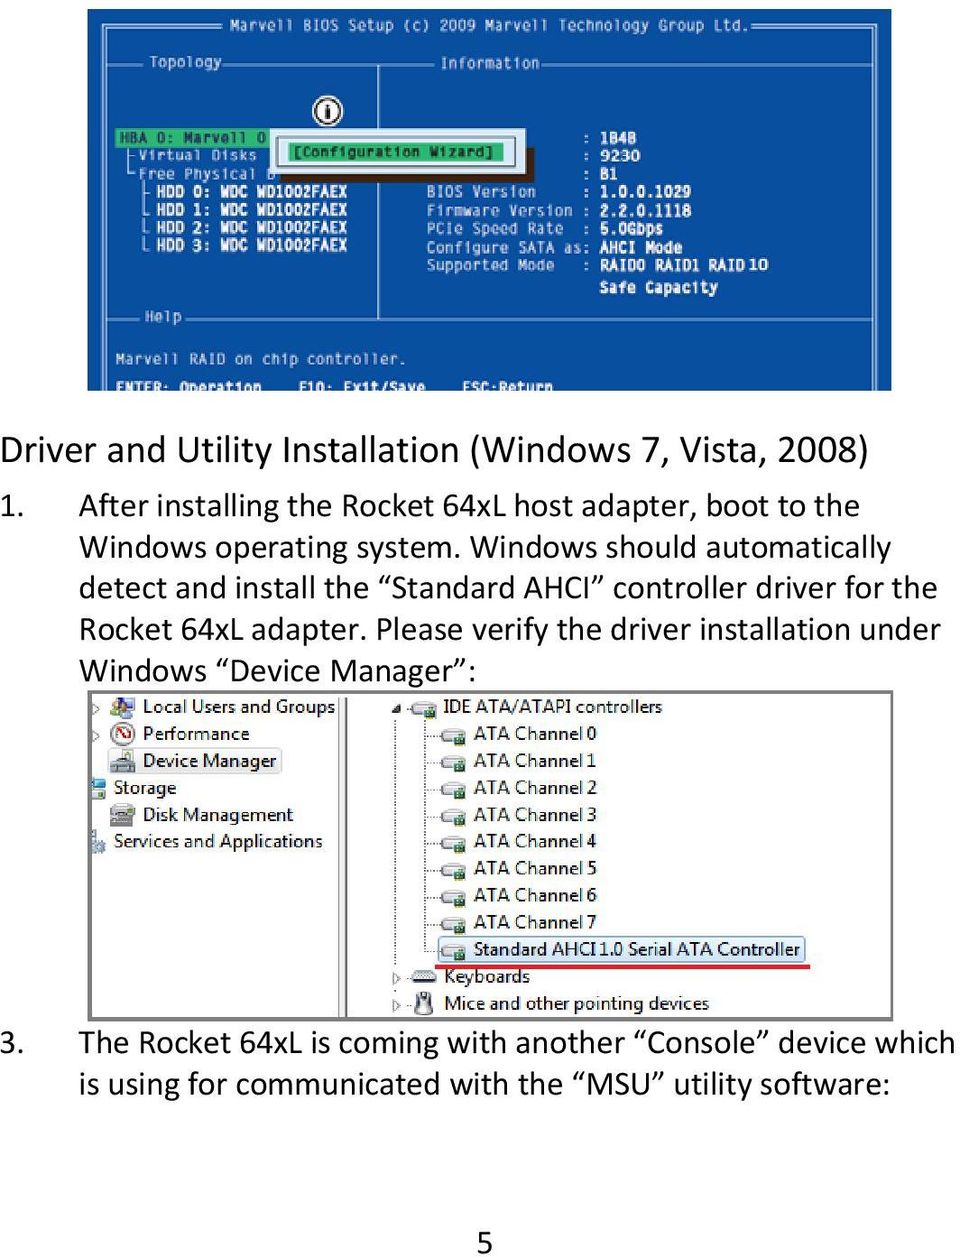 Windows should automatically detect and install the Standard AHCI controller driver for the Rocket 64xL adapter.